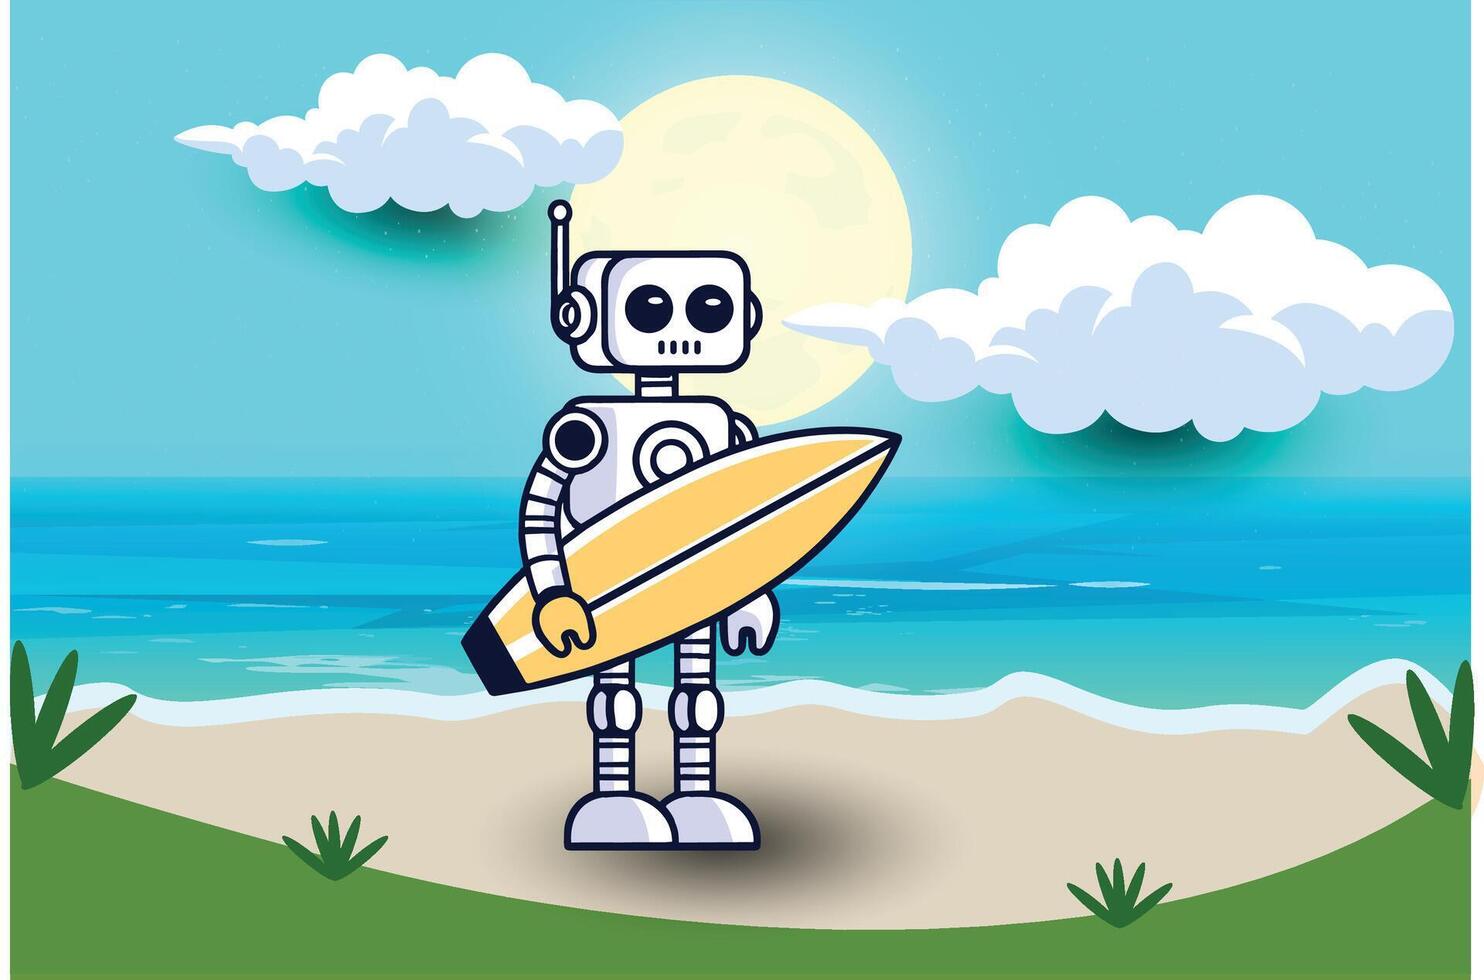 Cute Robot bring a surfboard for surfing. background on beach Cartoon Vector Icon Illustration. Concept Isolated Premium Vector.Flat Cartoon Style